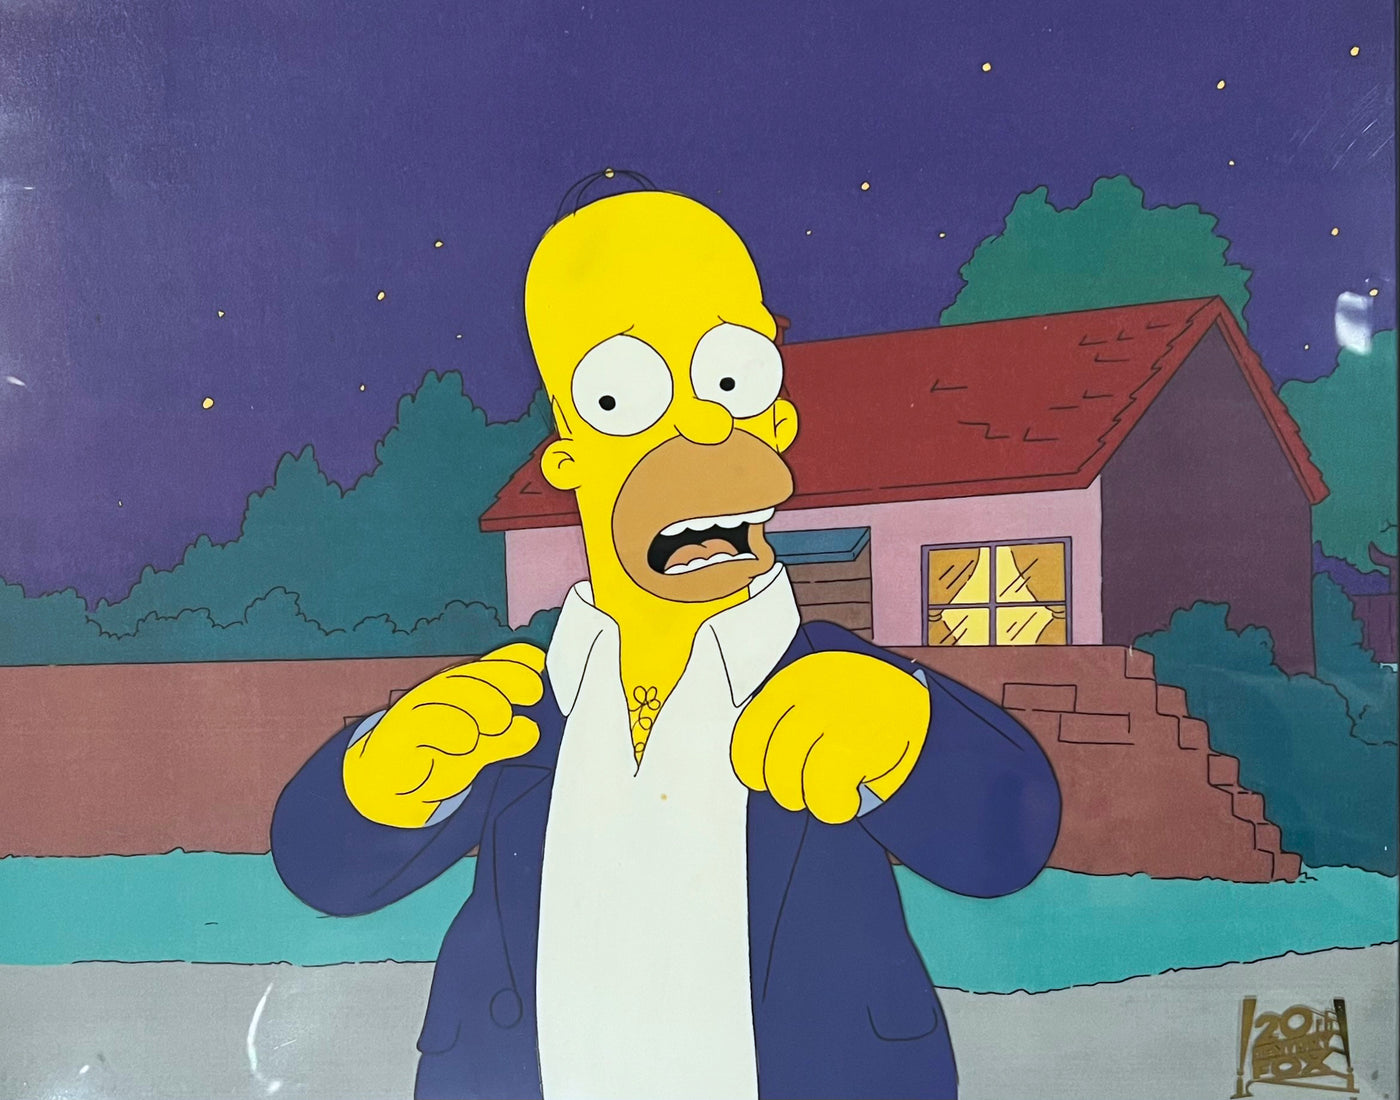 Original Production Cel from The Simpsons featuring Homer